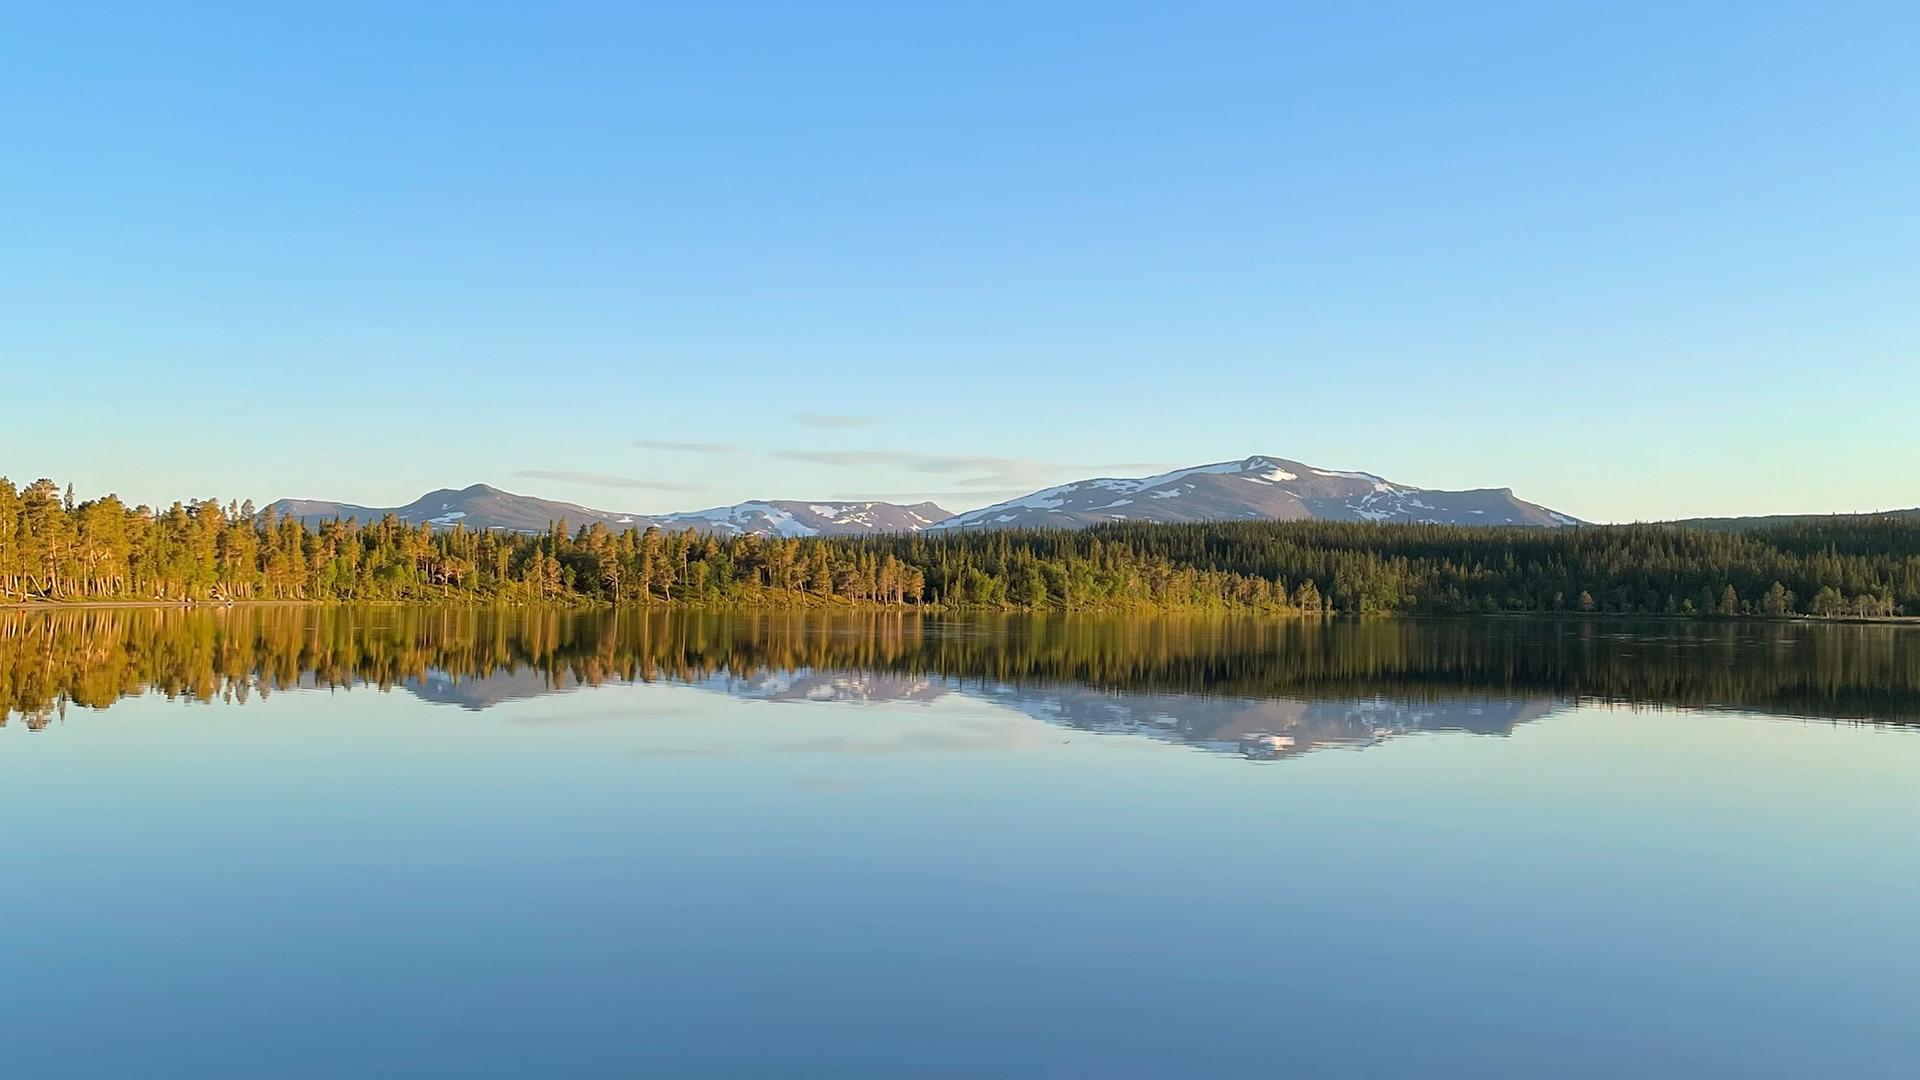 The water in Lake Nulltjärn is calm and reflects the blue sky and the surrounding forest and mountain.